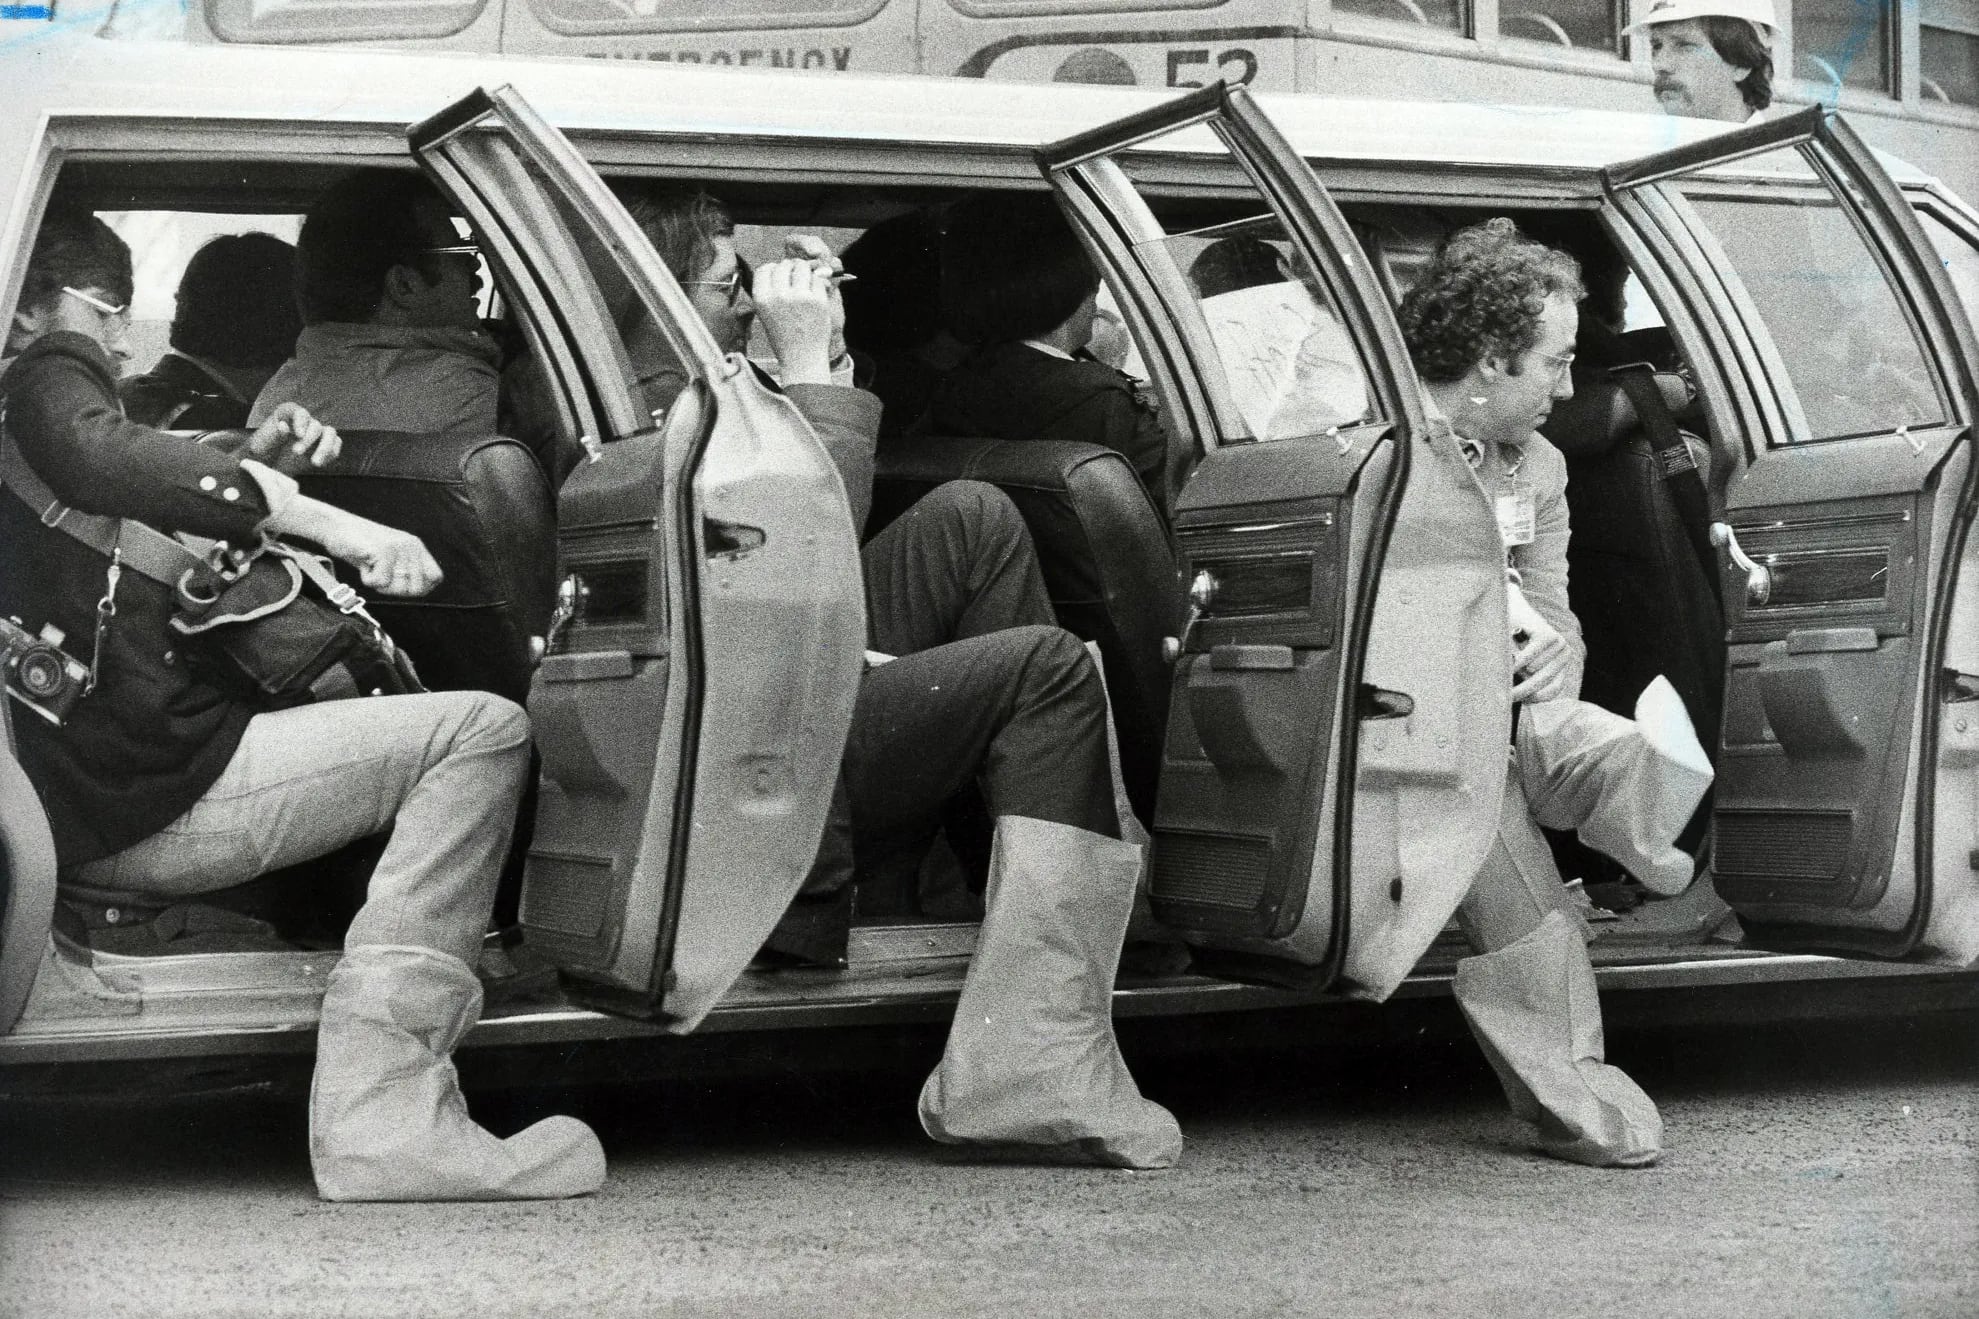 Members of the media put on booties before entering the Three Mile Island nuclear power plant in 1979.